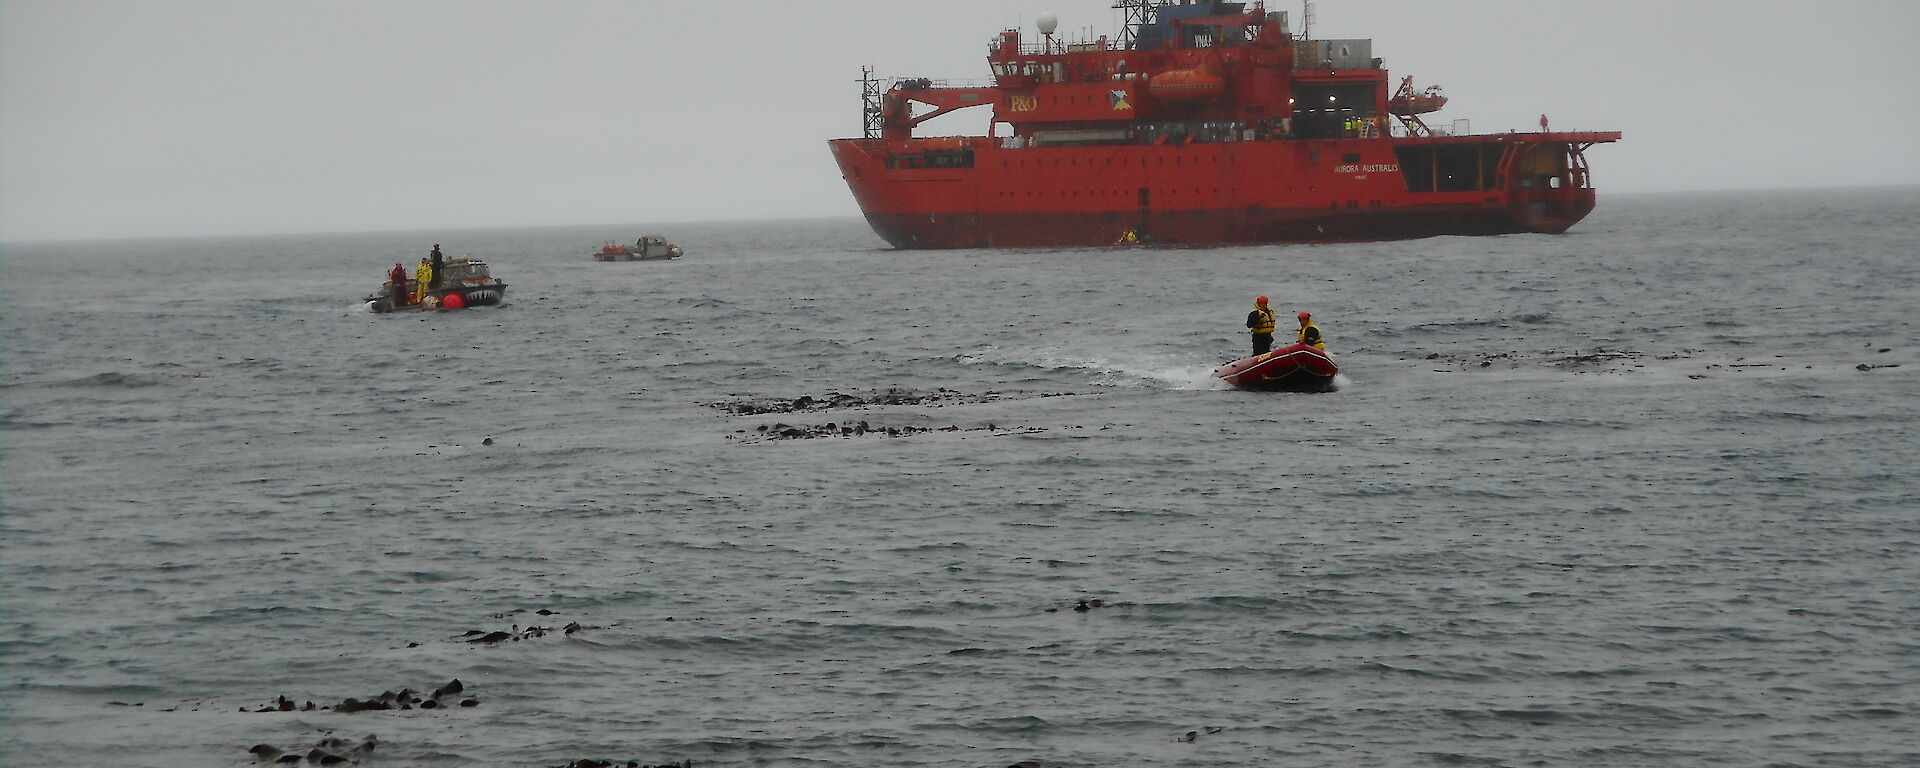 Two watercraft heading ashore from the icebreaker ship